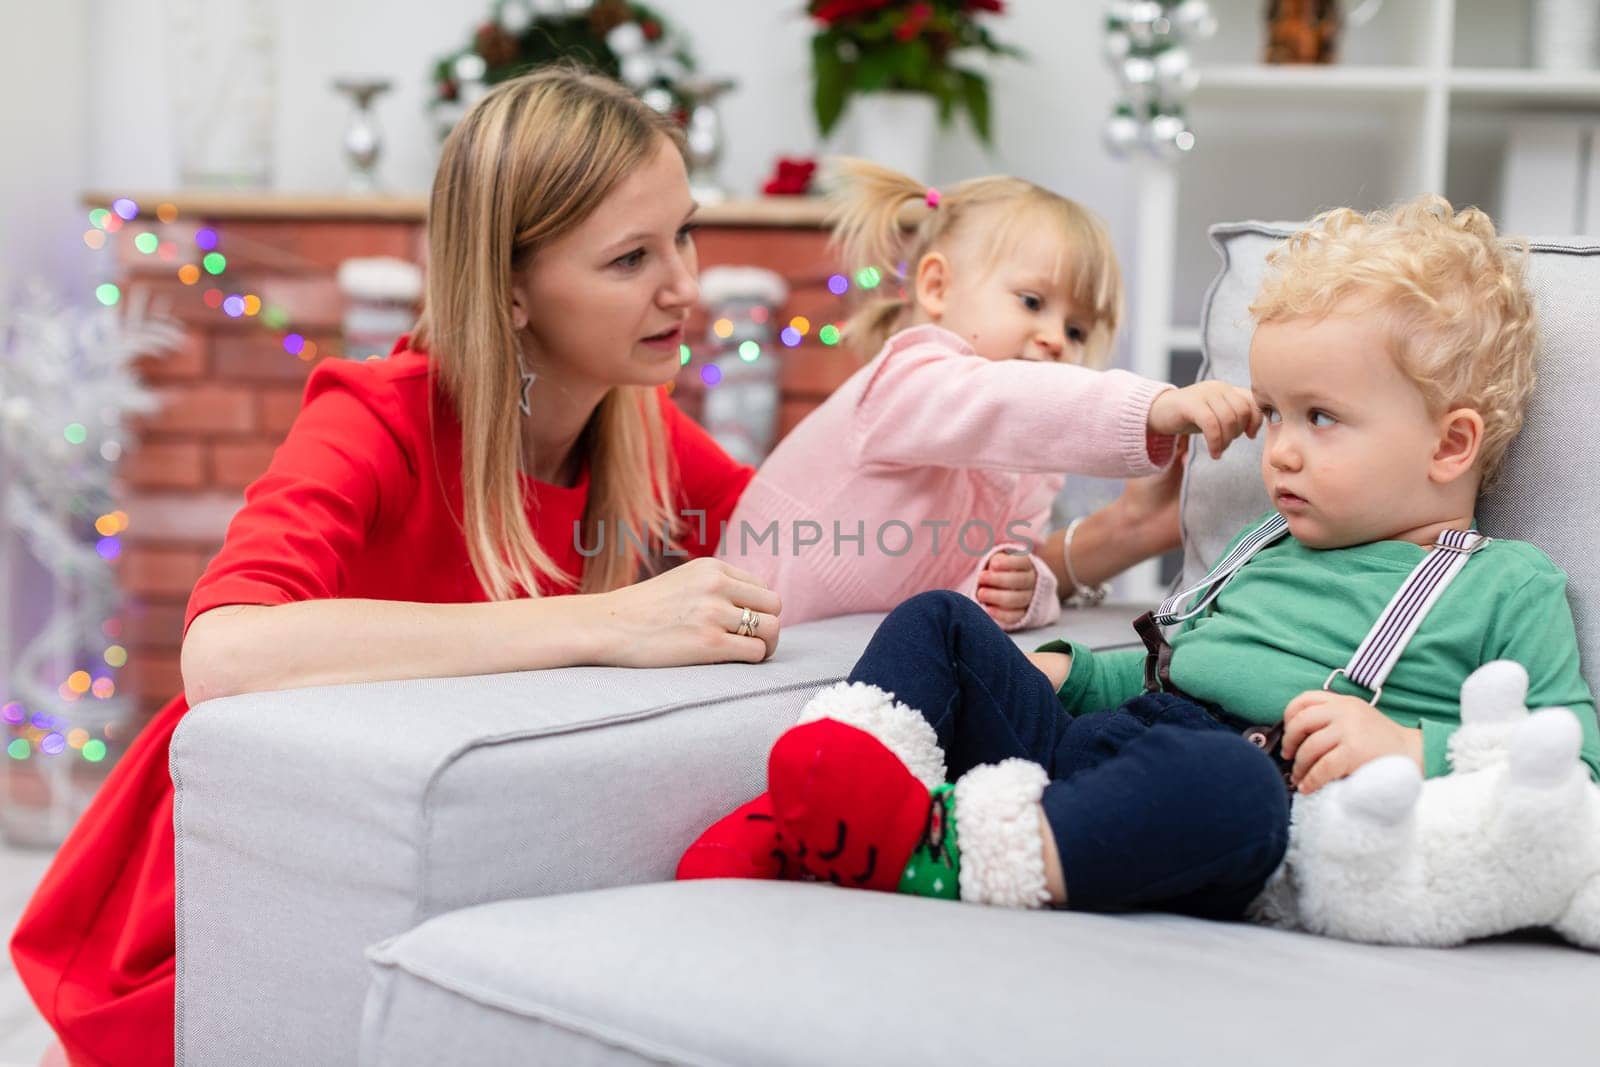 Mother, daughter and son against the background of a brick fireplace. The boy sits on the couch. Next to the couch crouches a woman. Next to the woman stands a little girl and extends her hand to her brother. Blurred background.